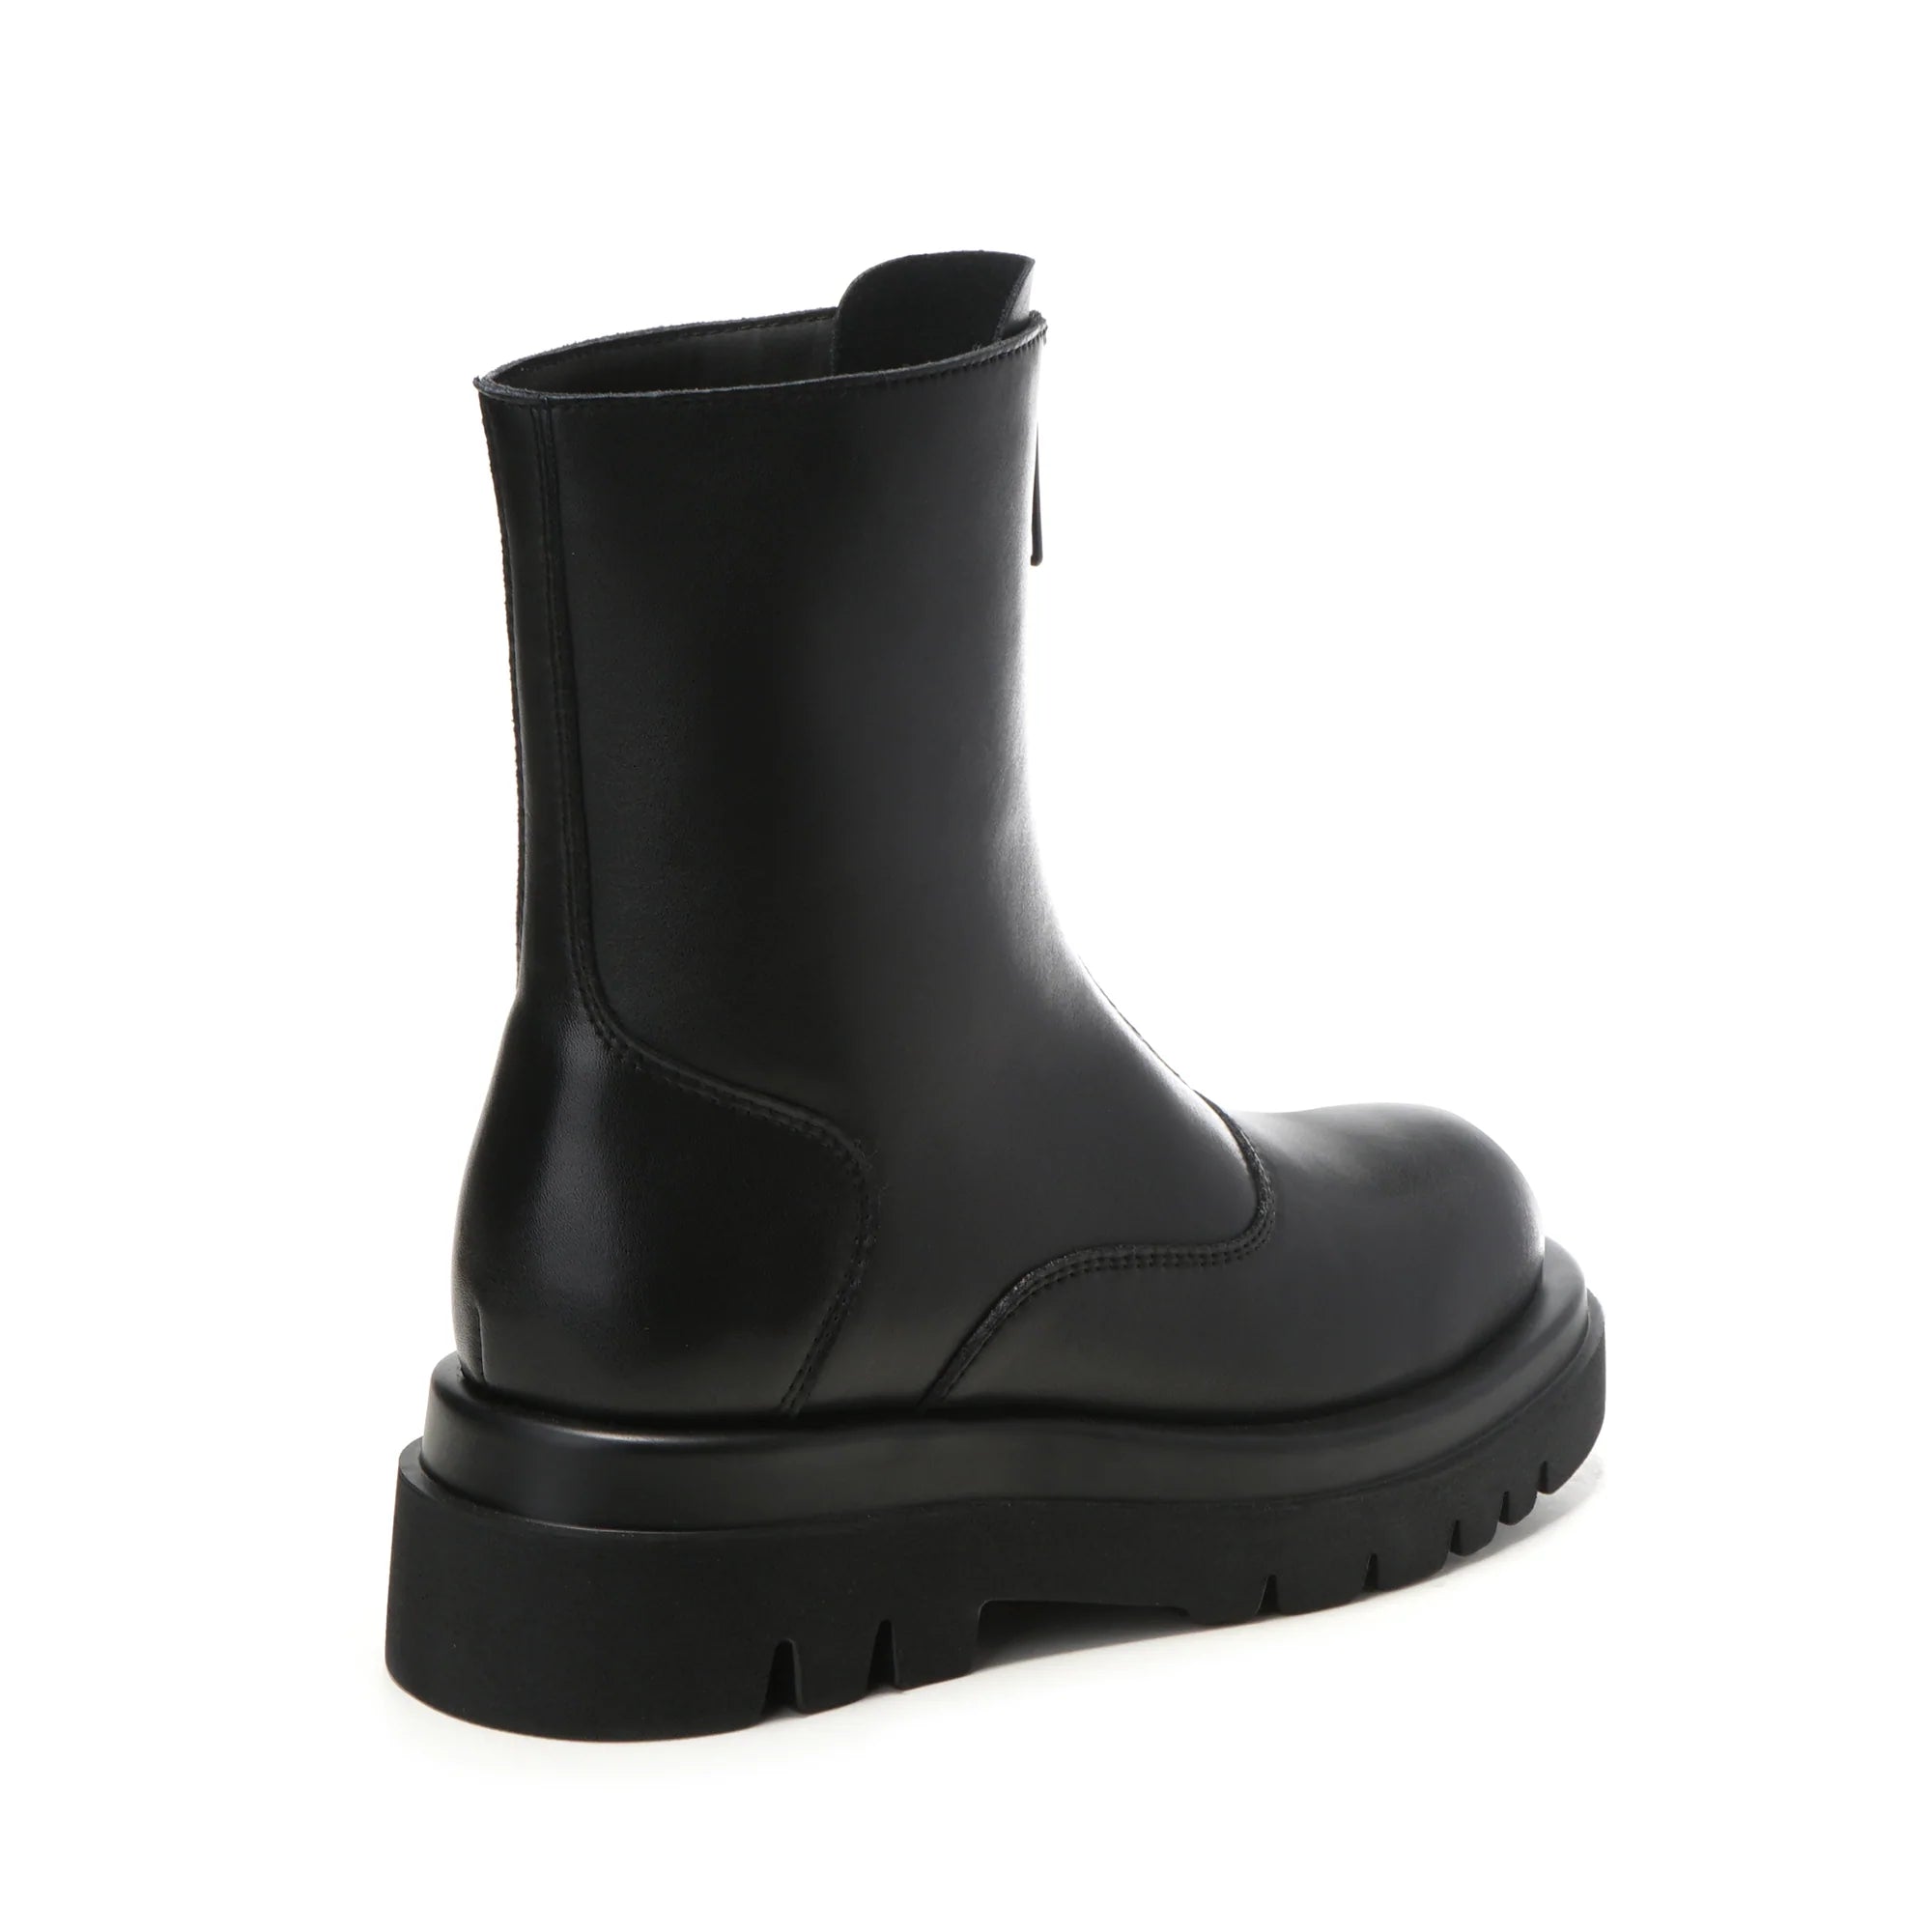 Leather Ugg Boots - UGG Bianca Front Zip Leather Boots - Original UGG Australia Classic